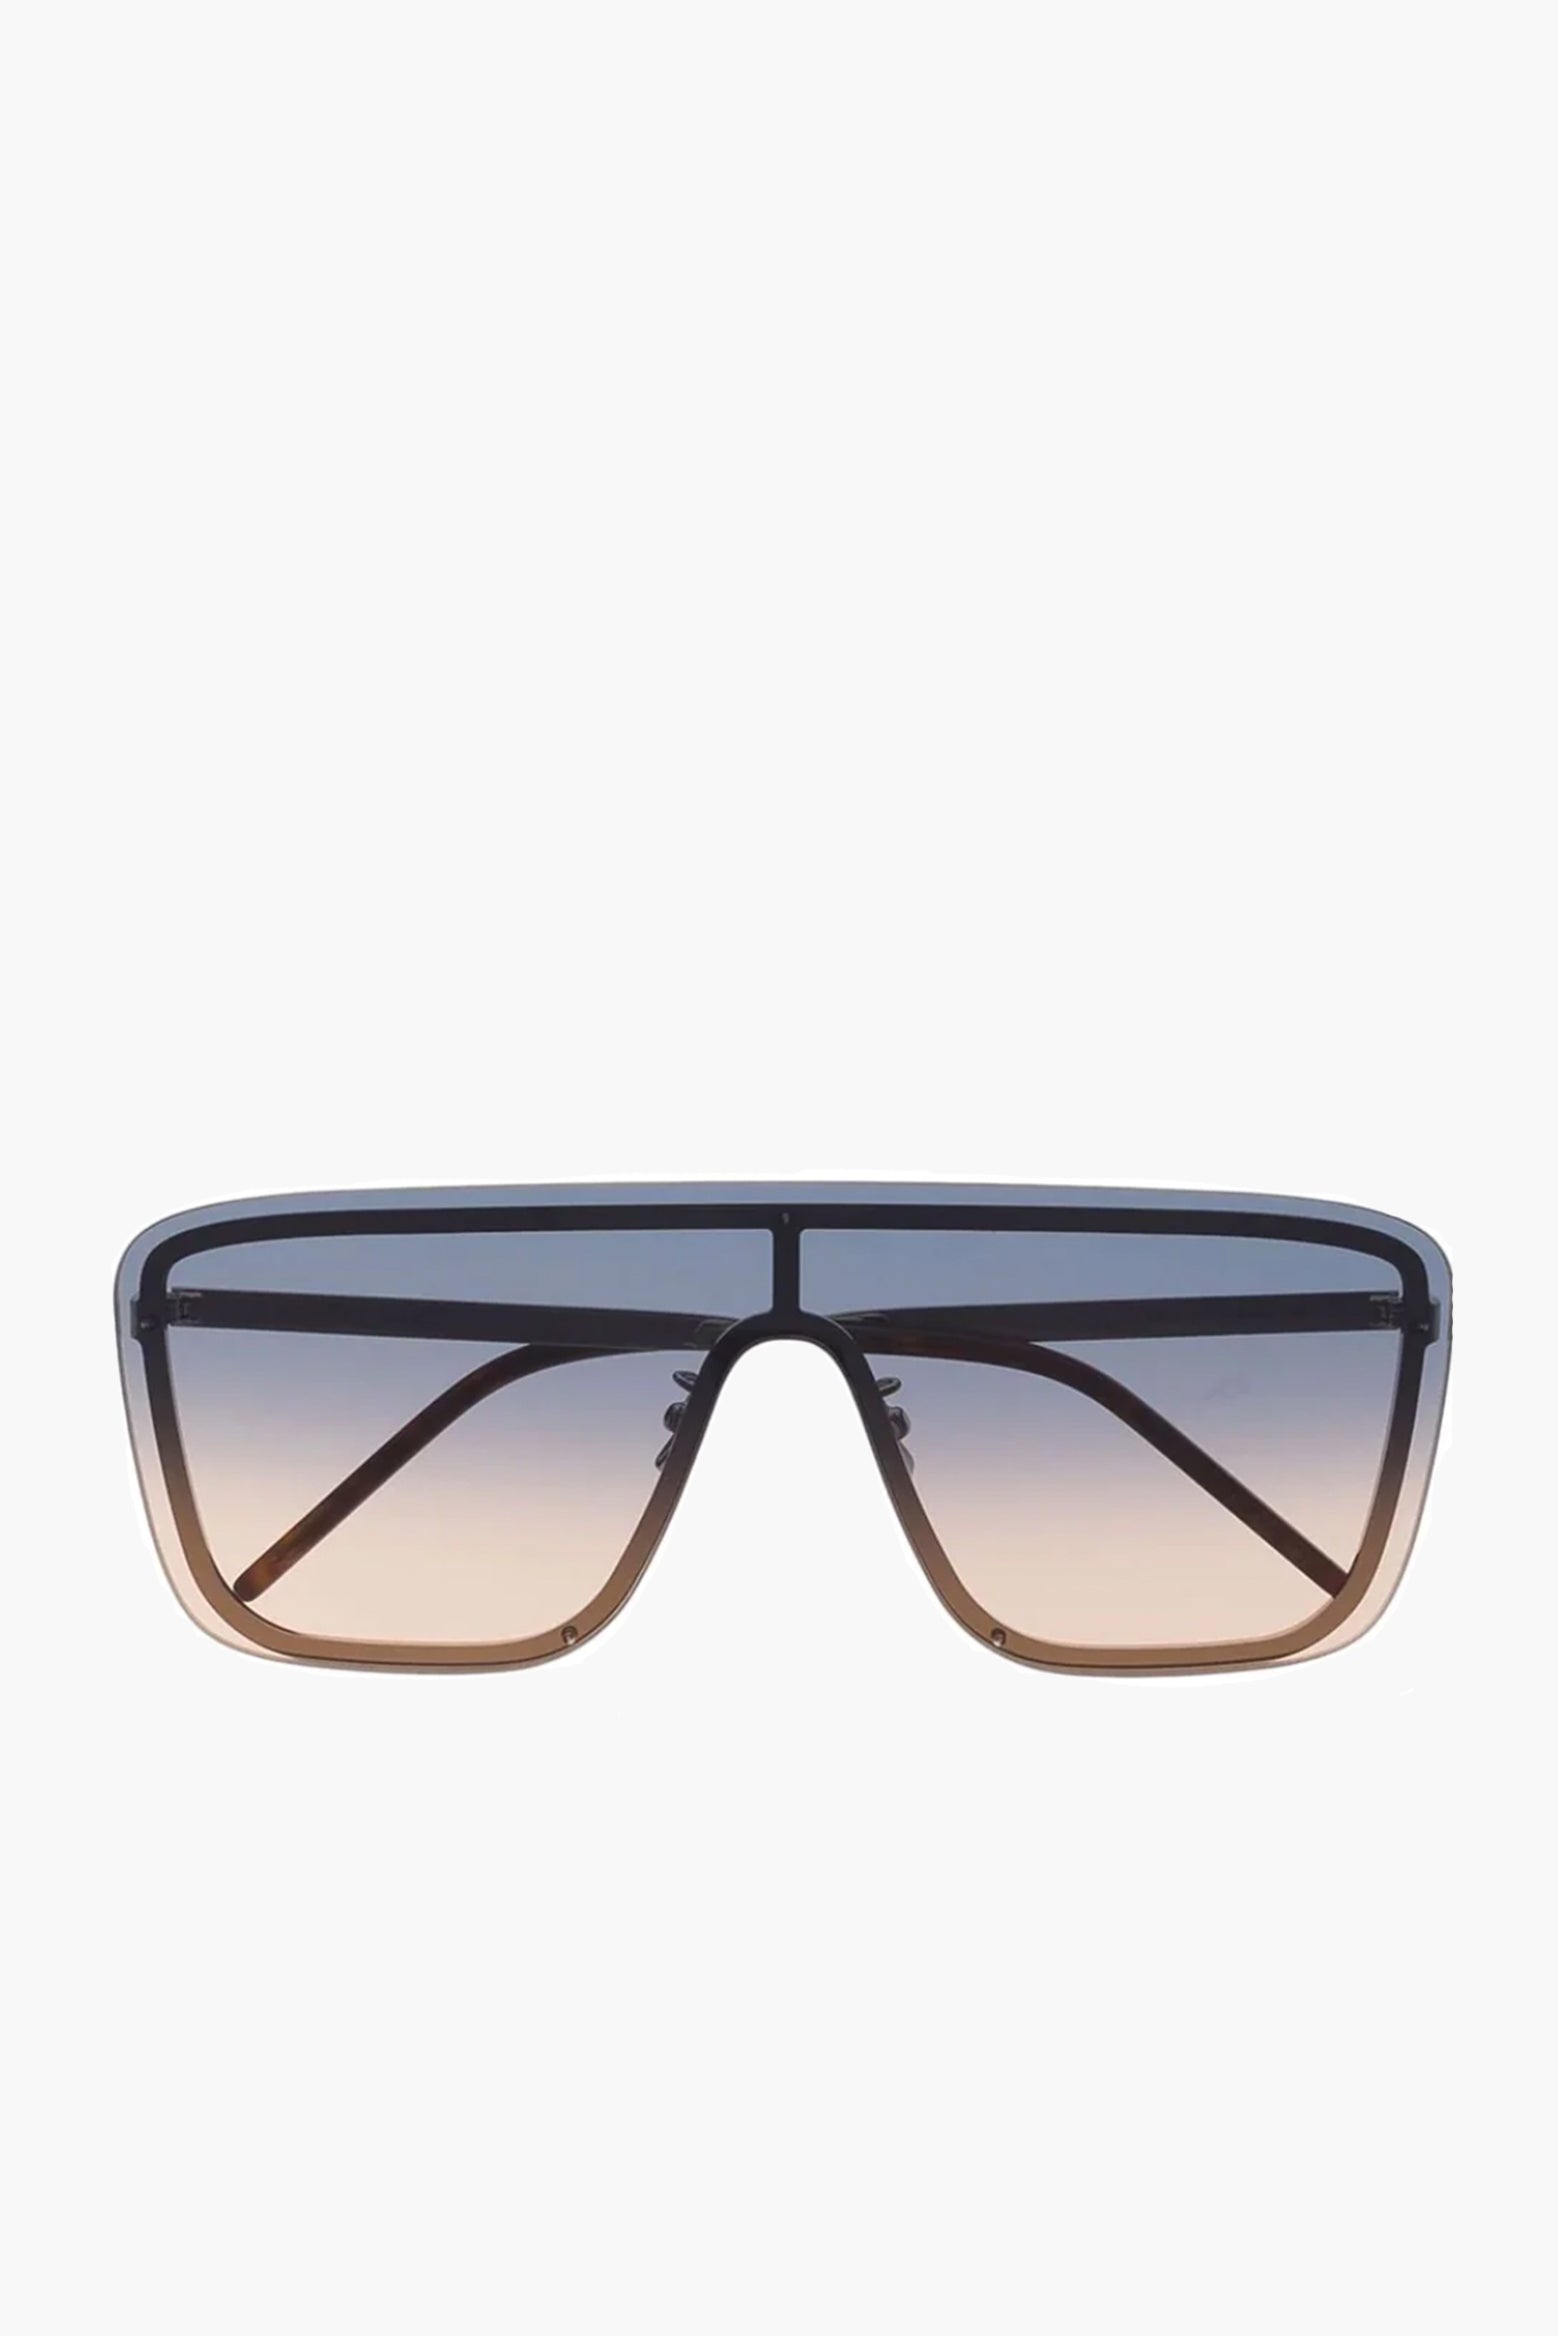 Saint Laurent Gradient Mask Sunglasses in Gradient available at The New Trend Australia.